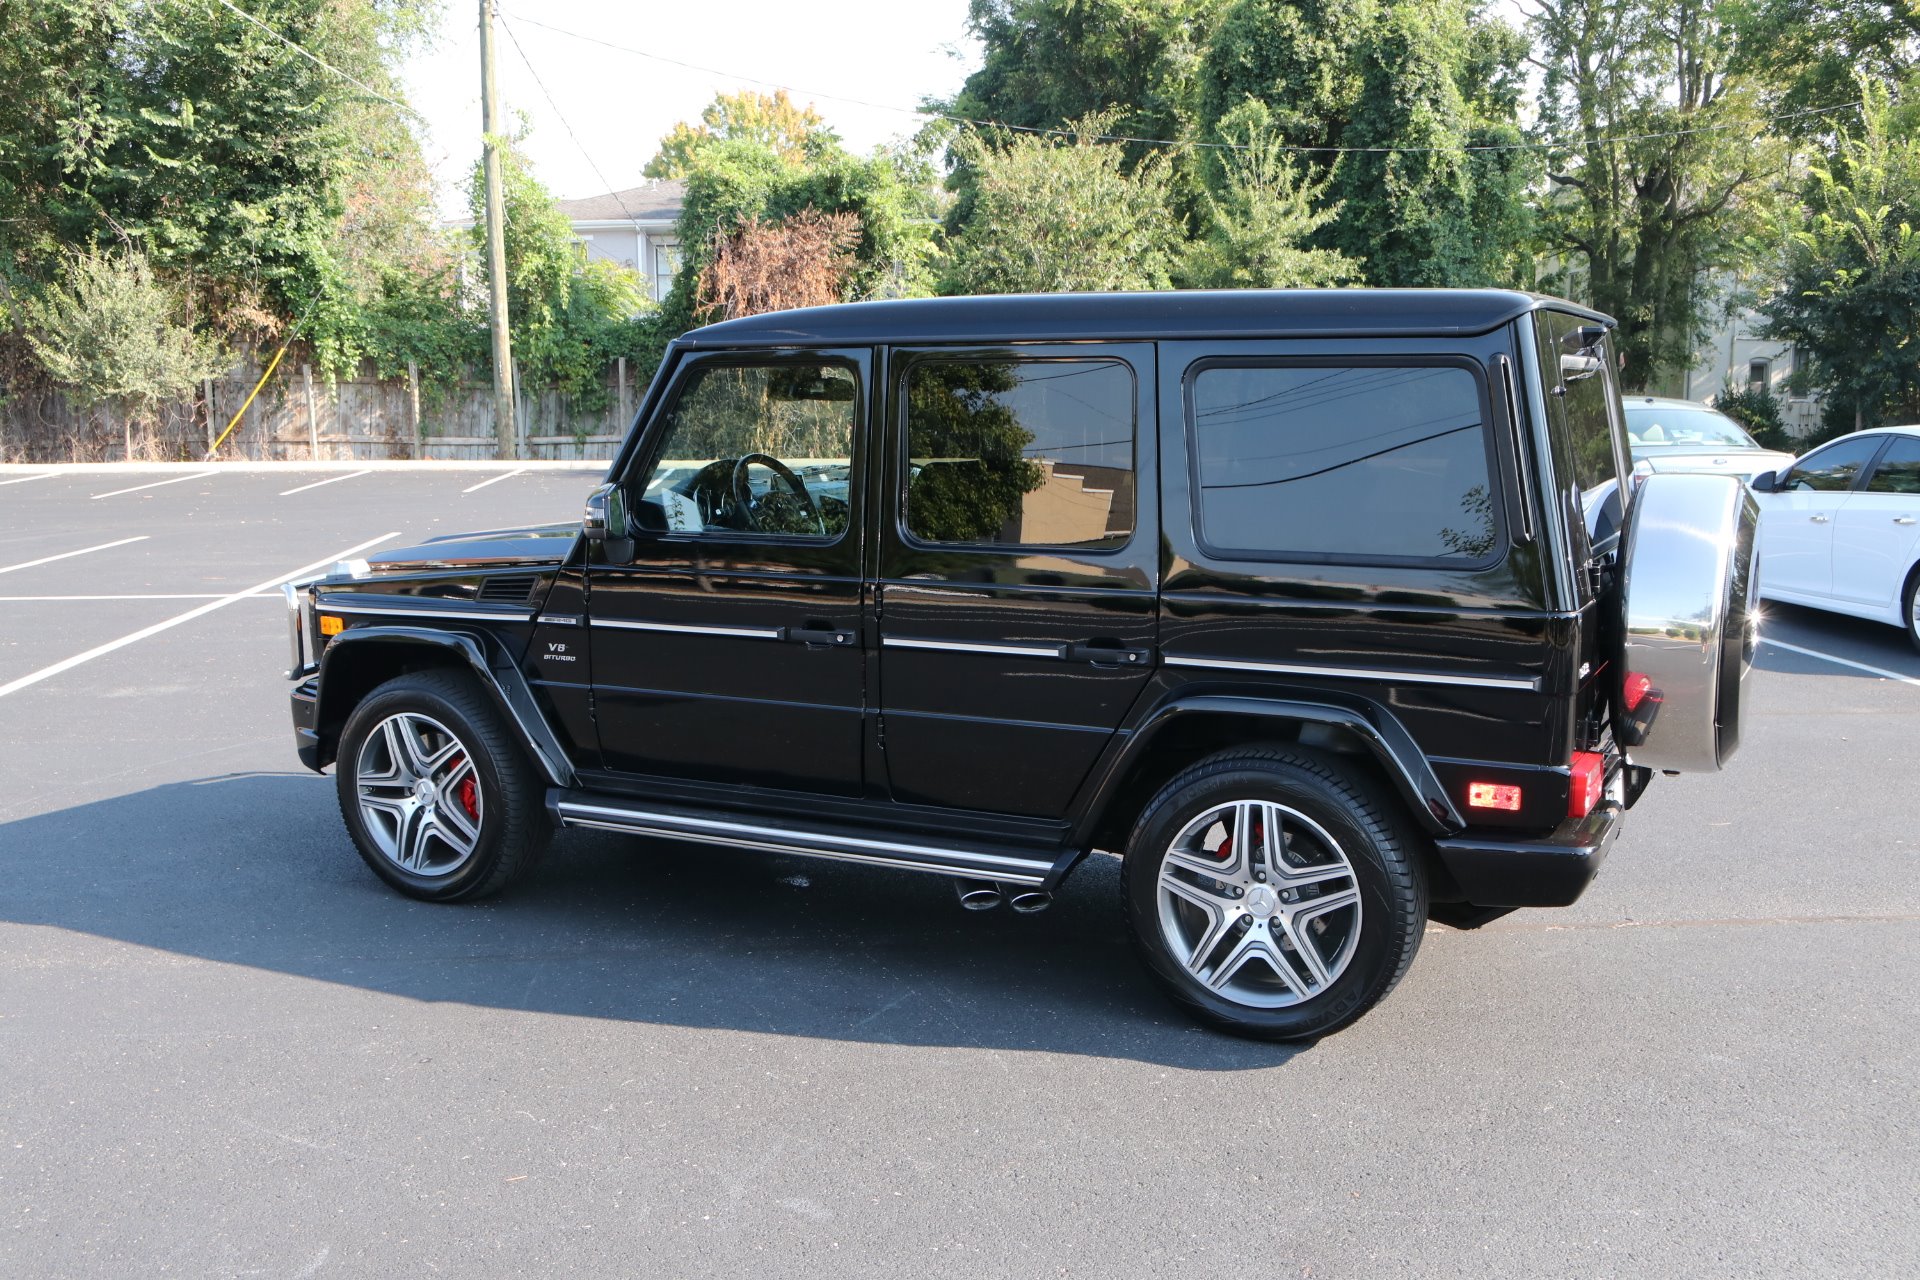 Used 13 Mercedes Benz G Class G 63 Amg For Sale 79 950 Auto Collection Stock